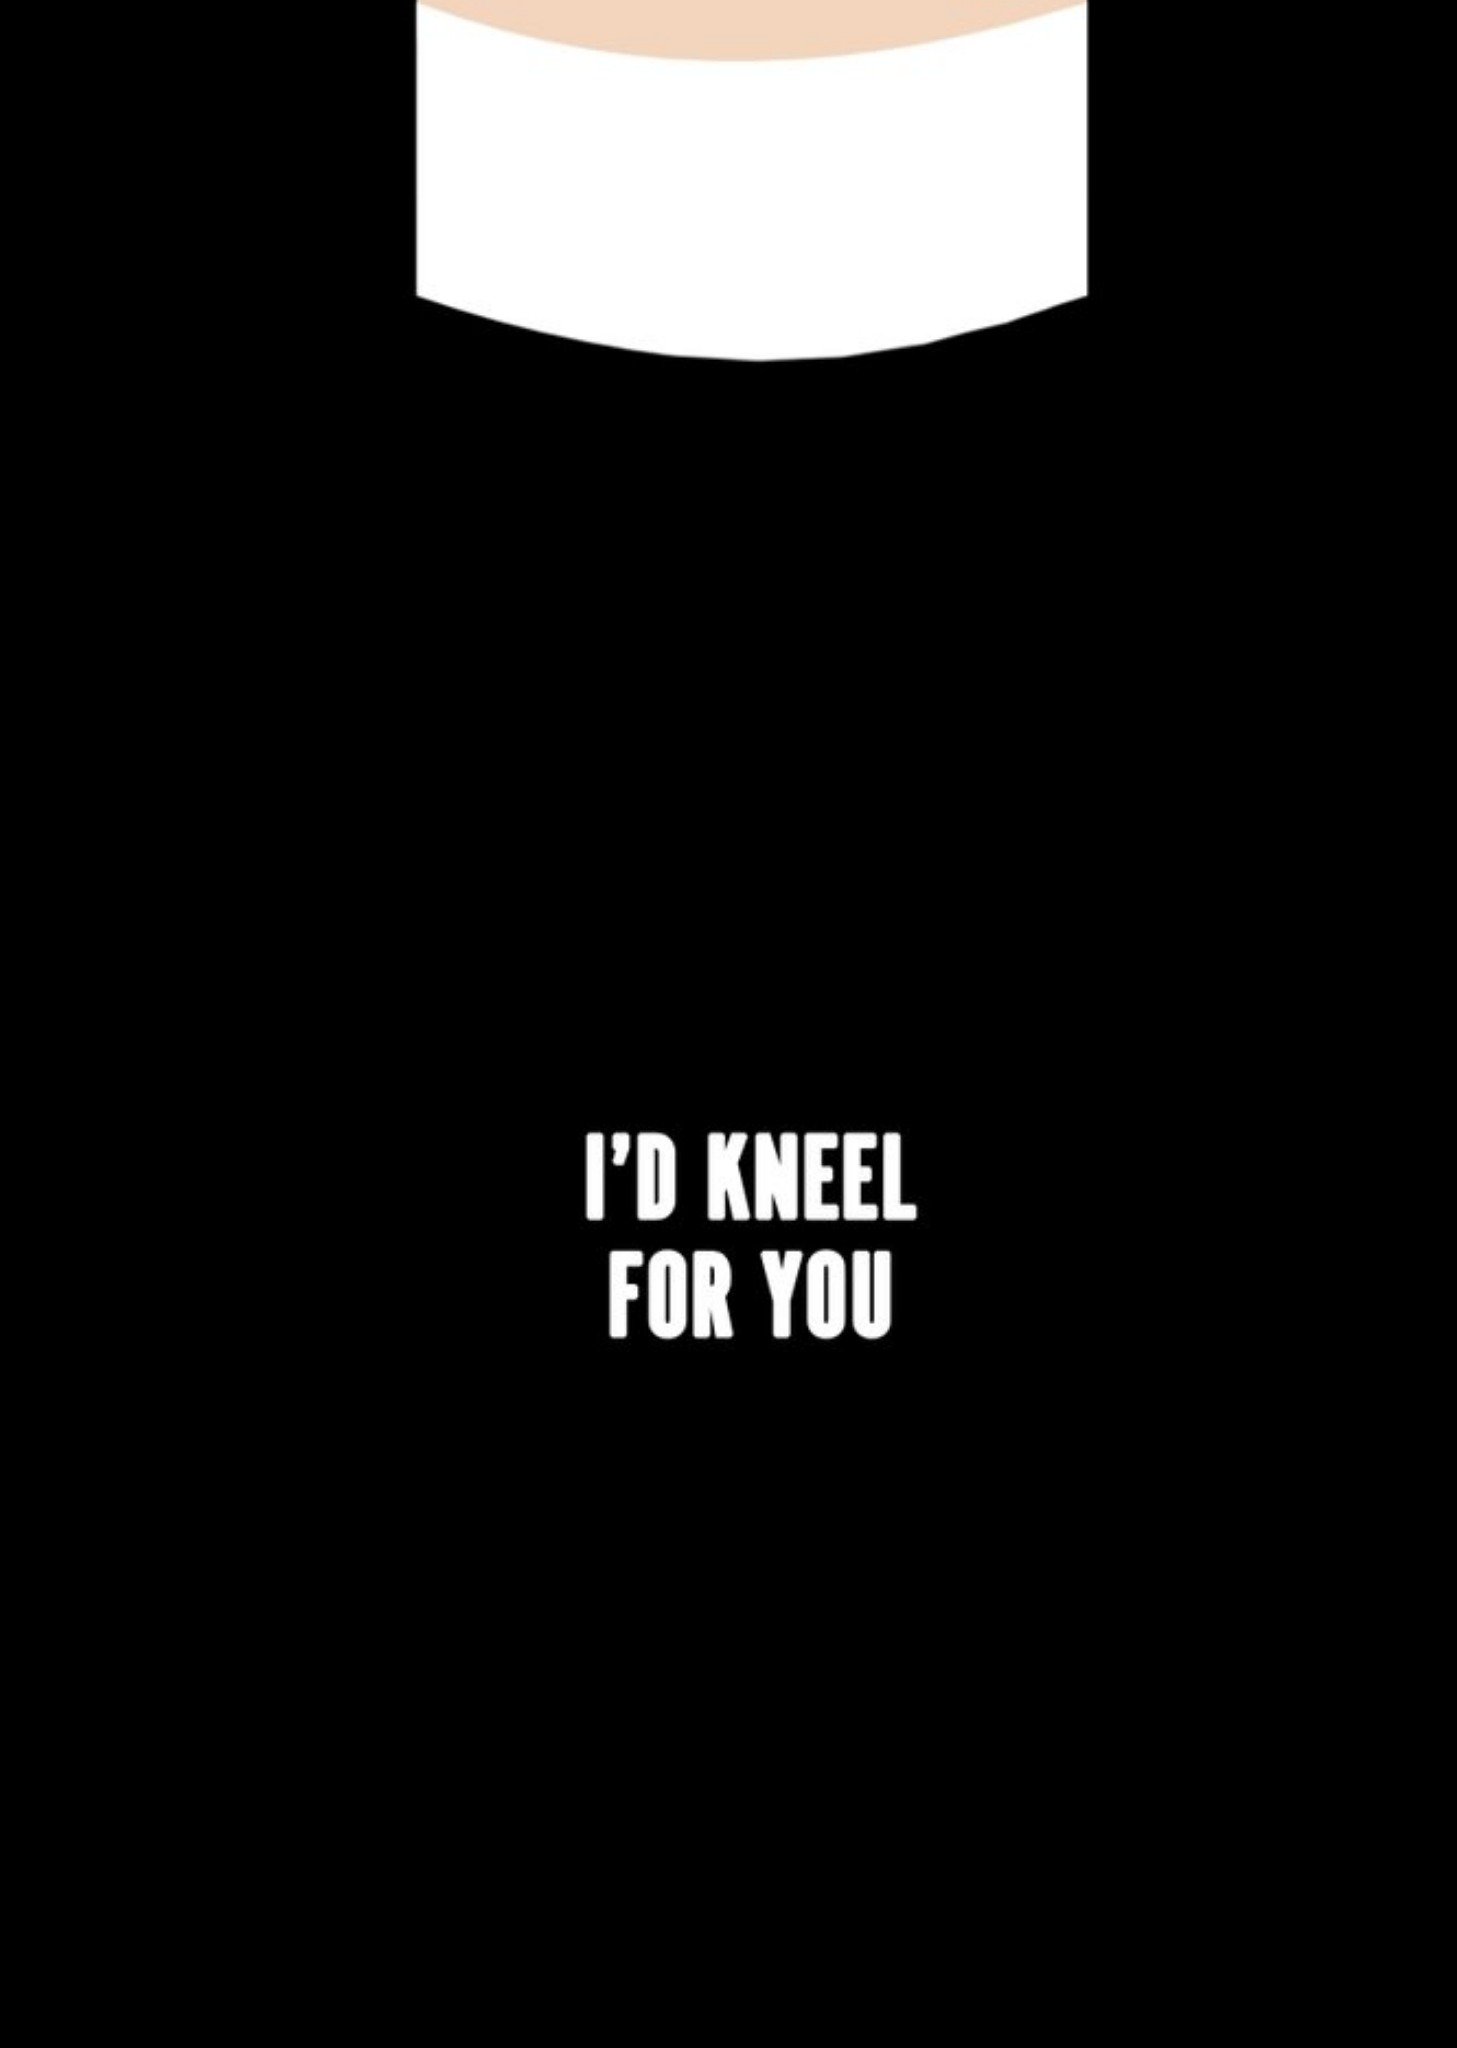 Moonpig Topical I'd Kneel For You Themed Valentine's Day Card Ecard